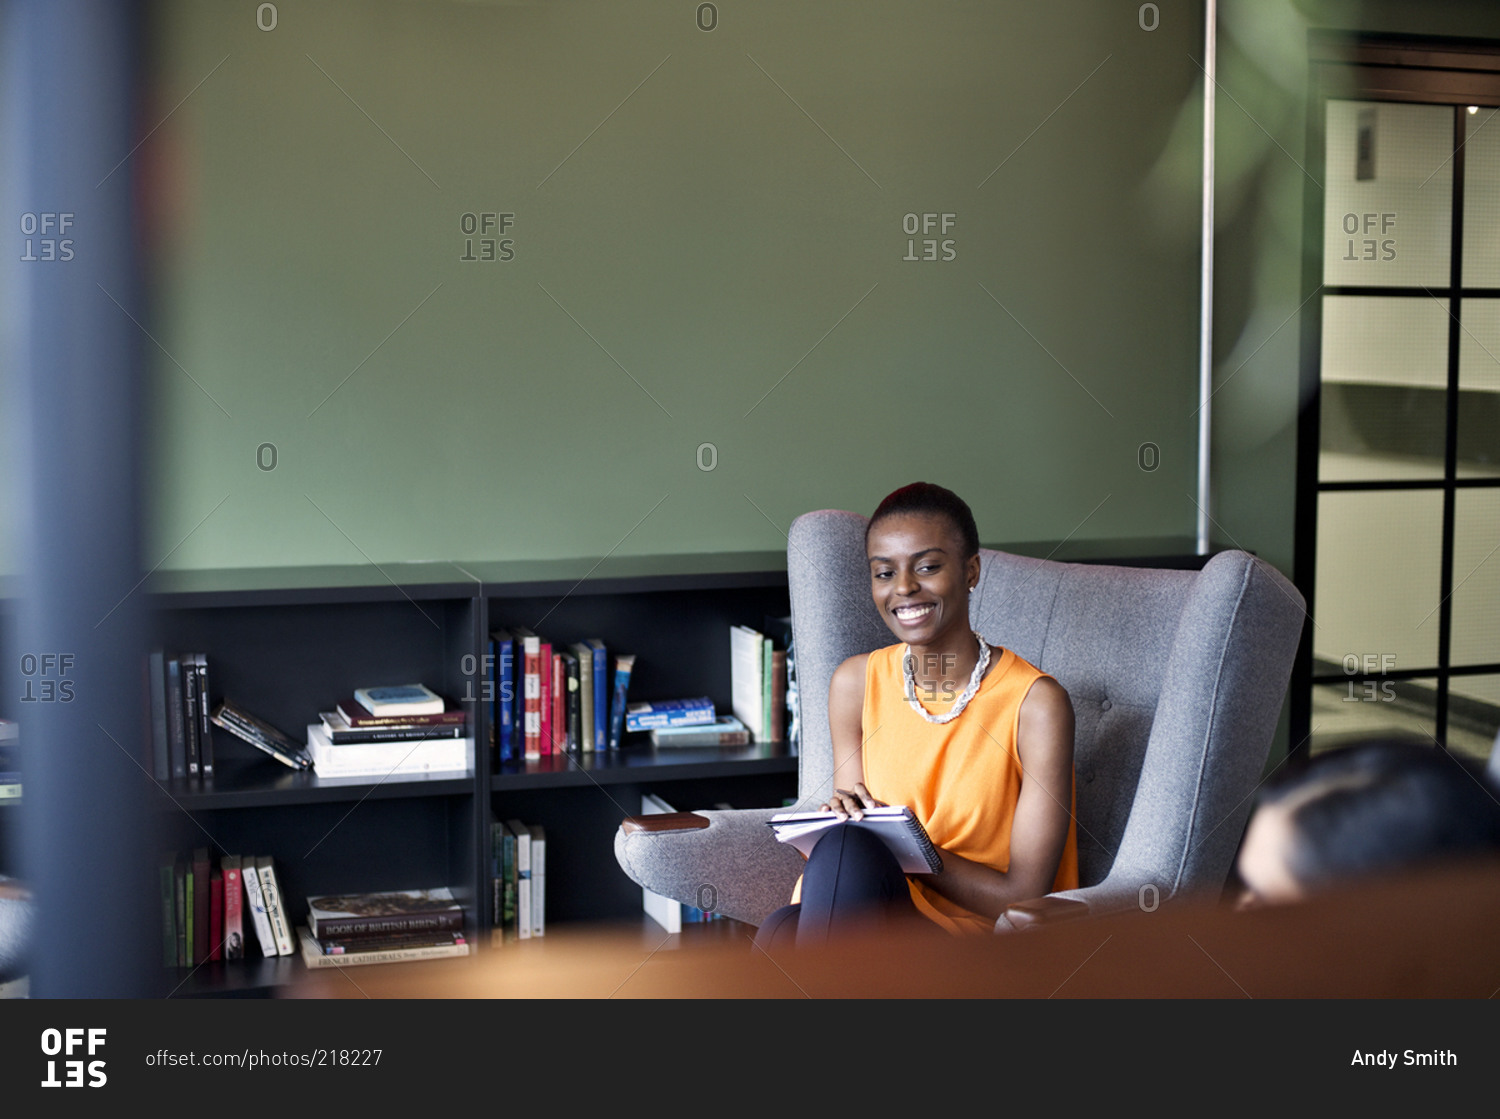 A woman smiles at a colleague in an office common area